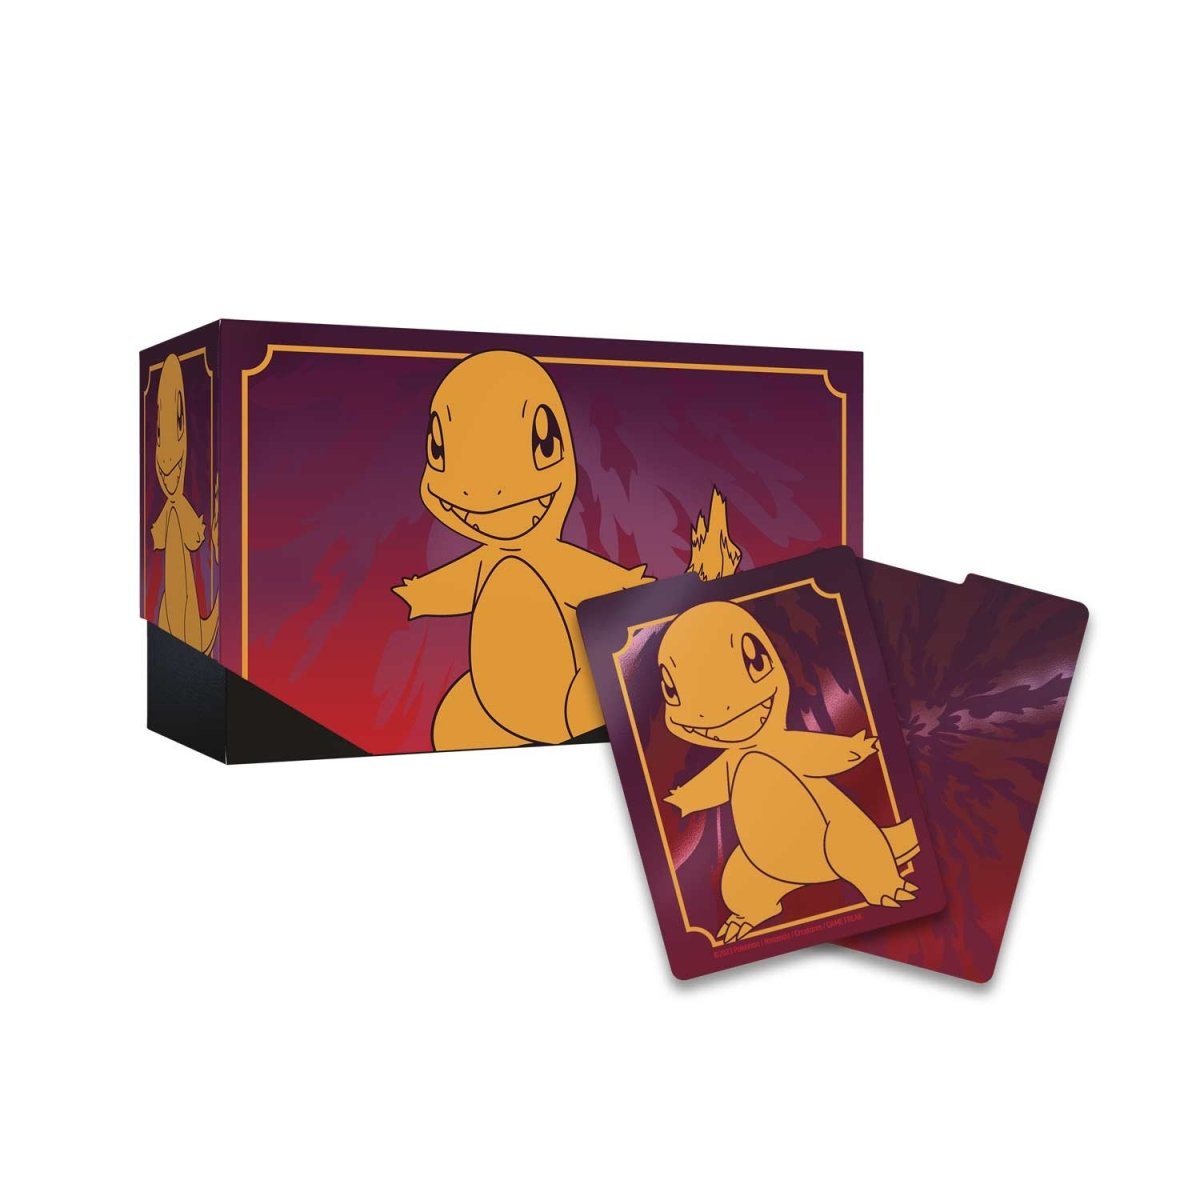 Hold your collection in this cool Charmander box with dividers